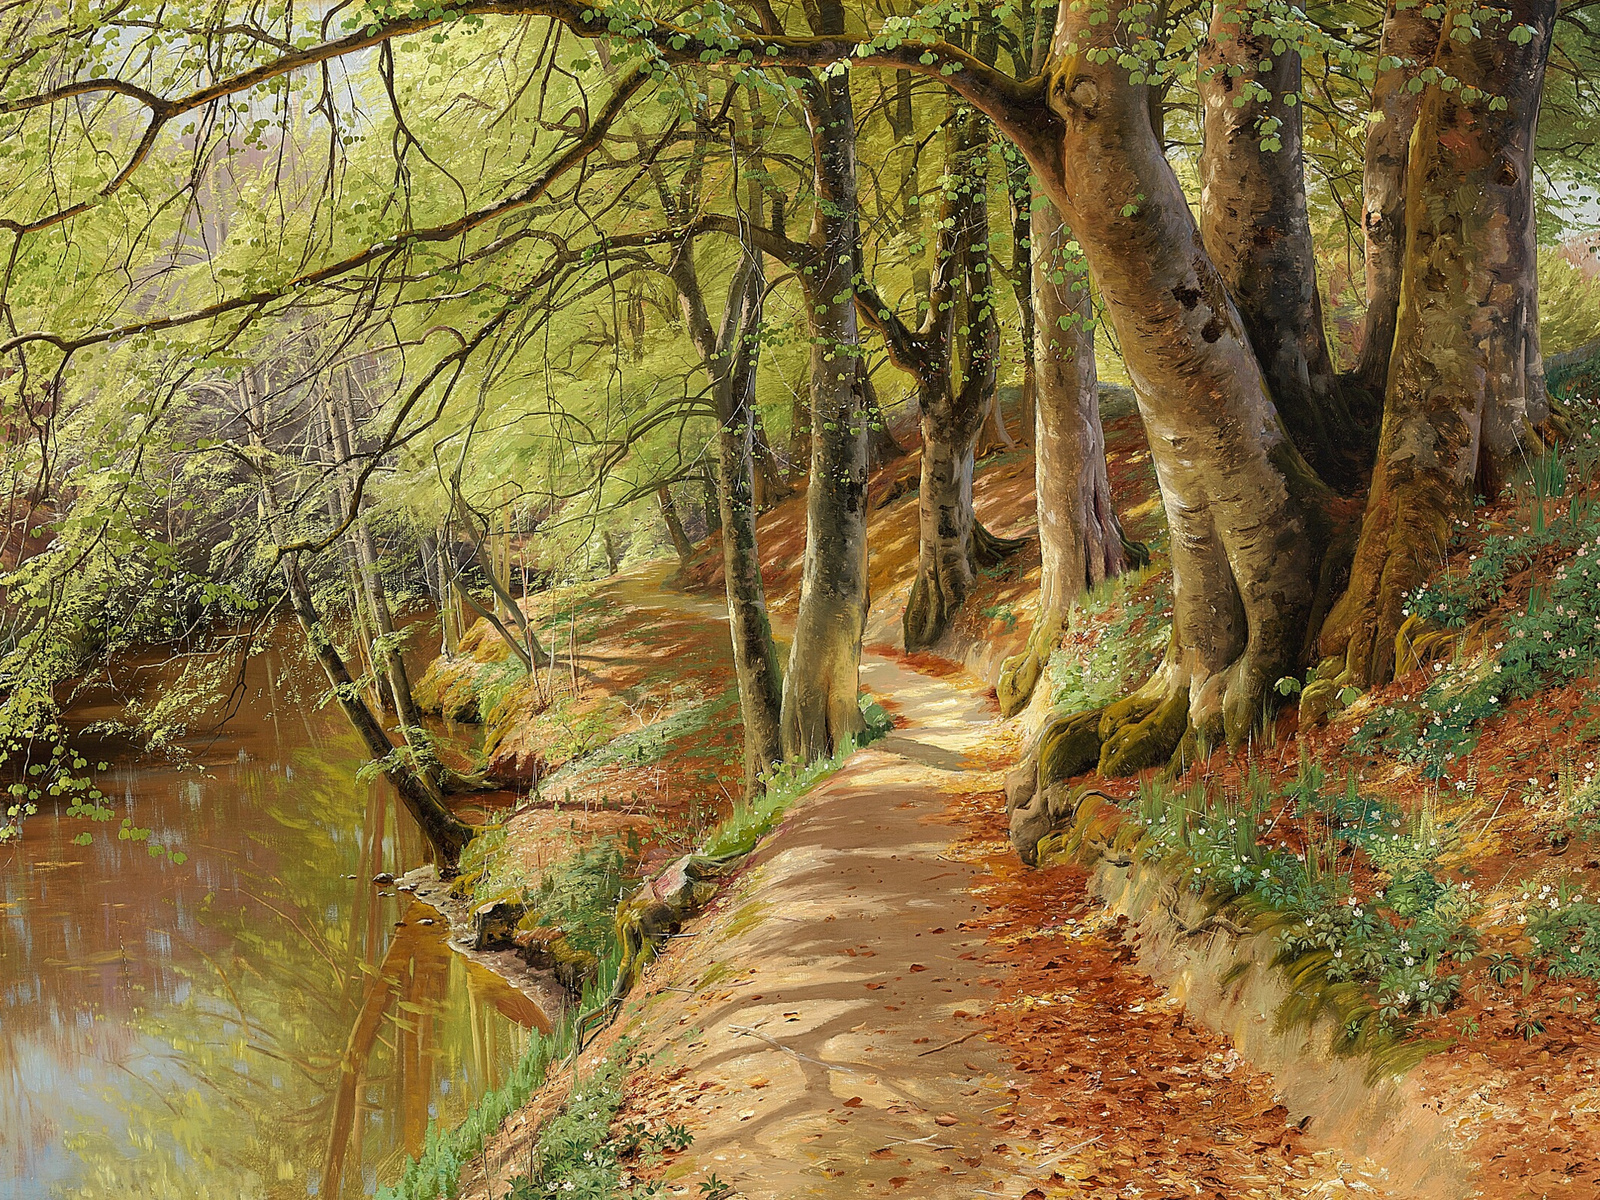 peder mork monsted, danish, 1895, a spring day in the woods with fresh-blown beeches and anemones in the forest bed